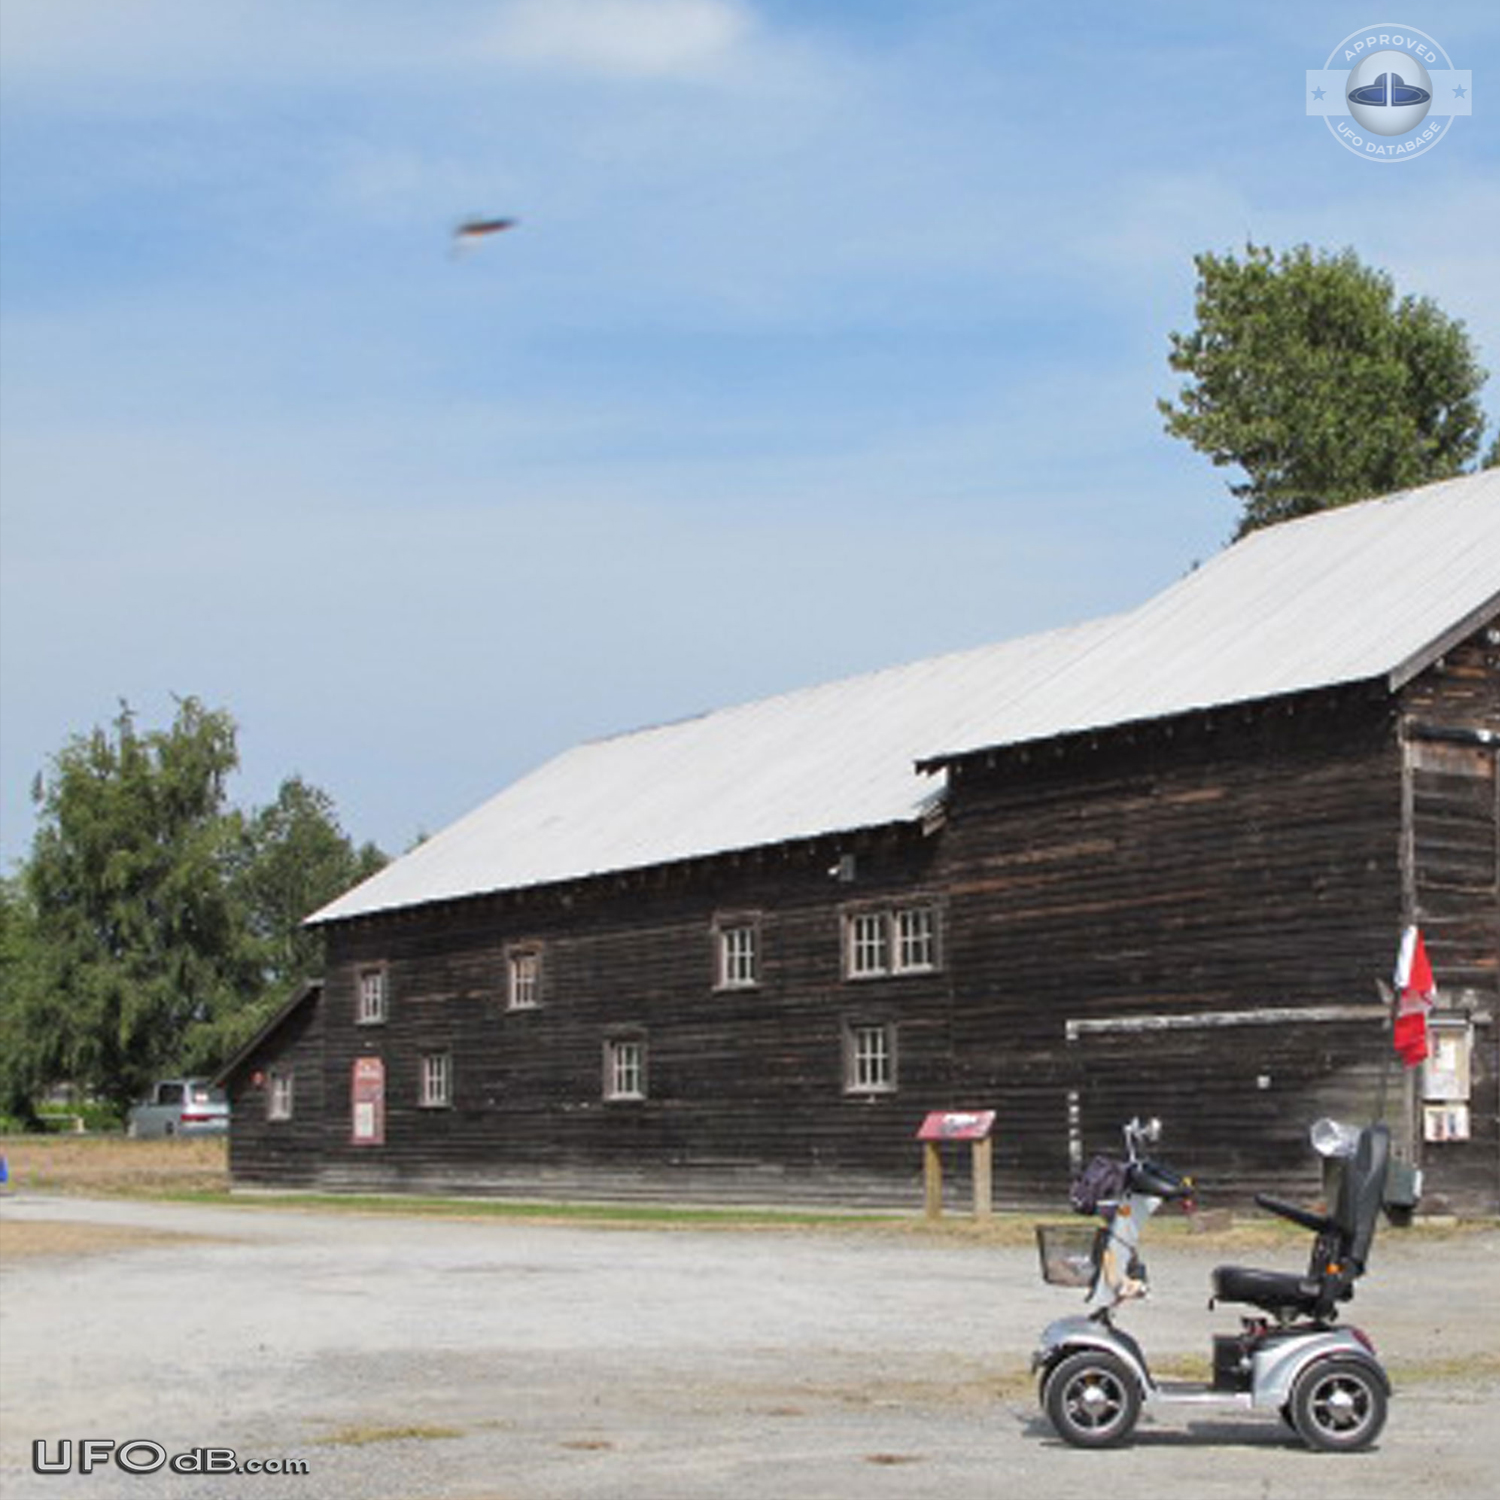 Photo captures passing UFO in Richmond, BC, Canada in August 2012 UFO Picture #474-1